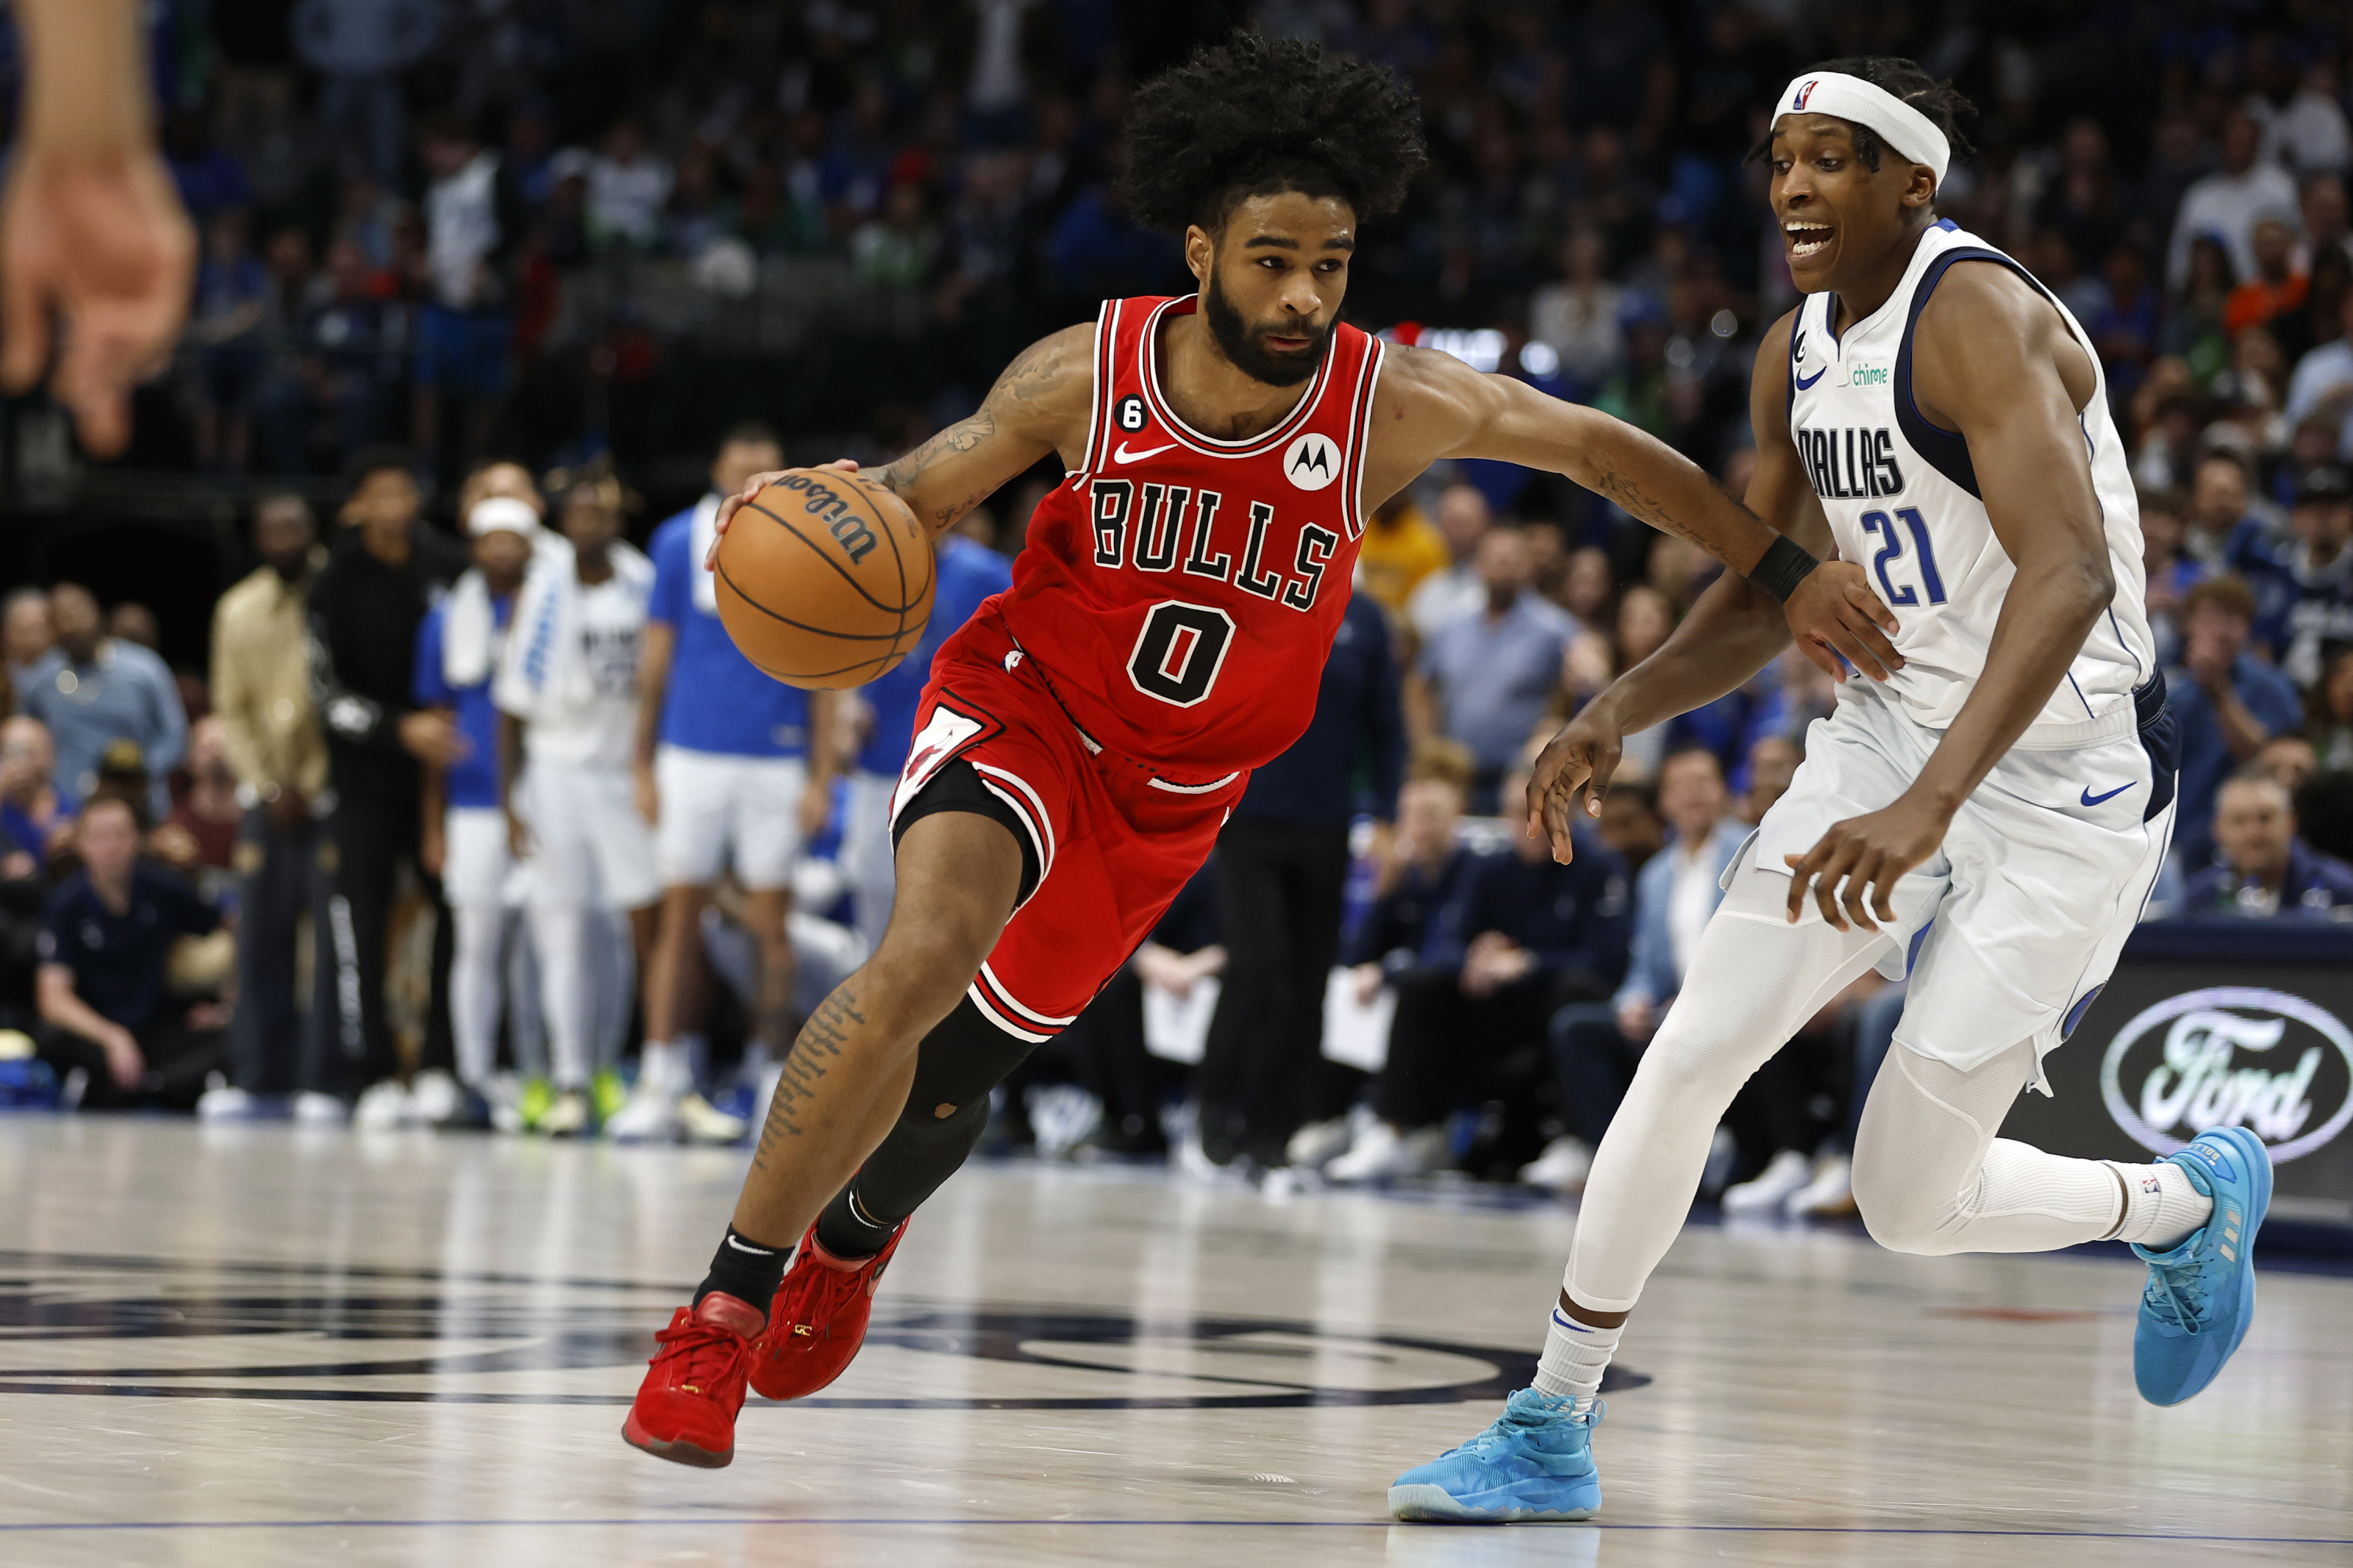 Coby White opens up about his improvements this season - CHGO